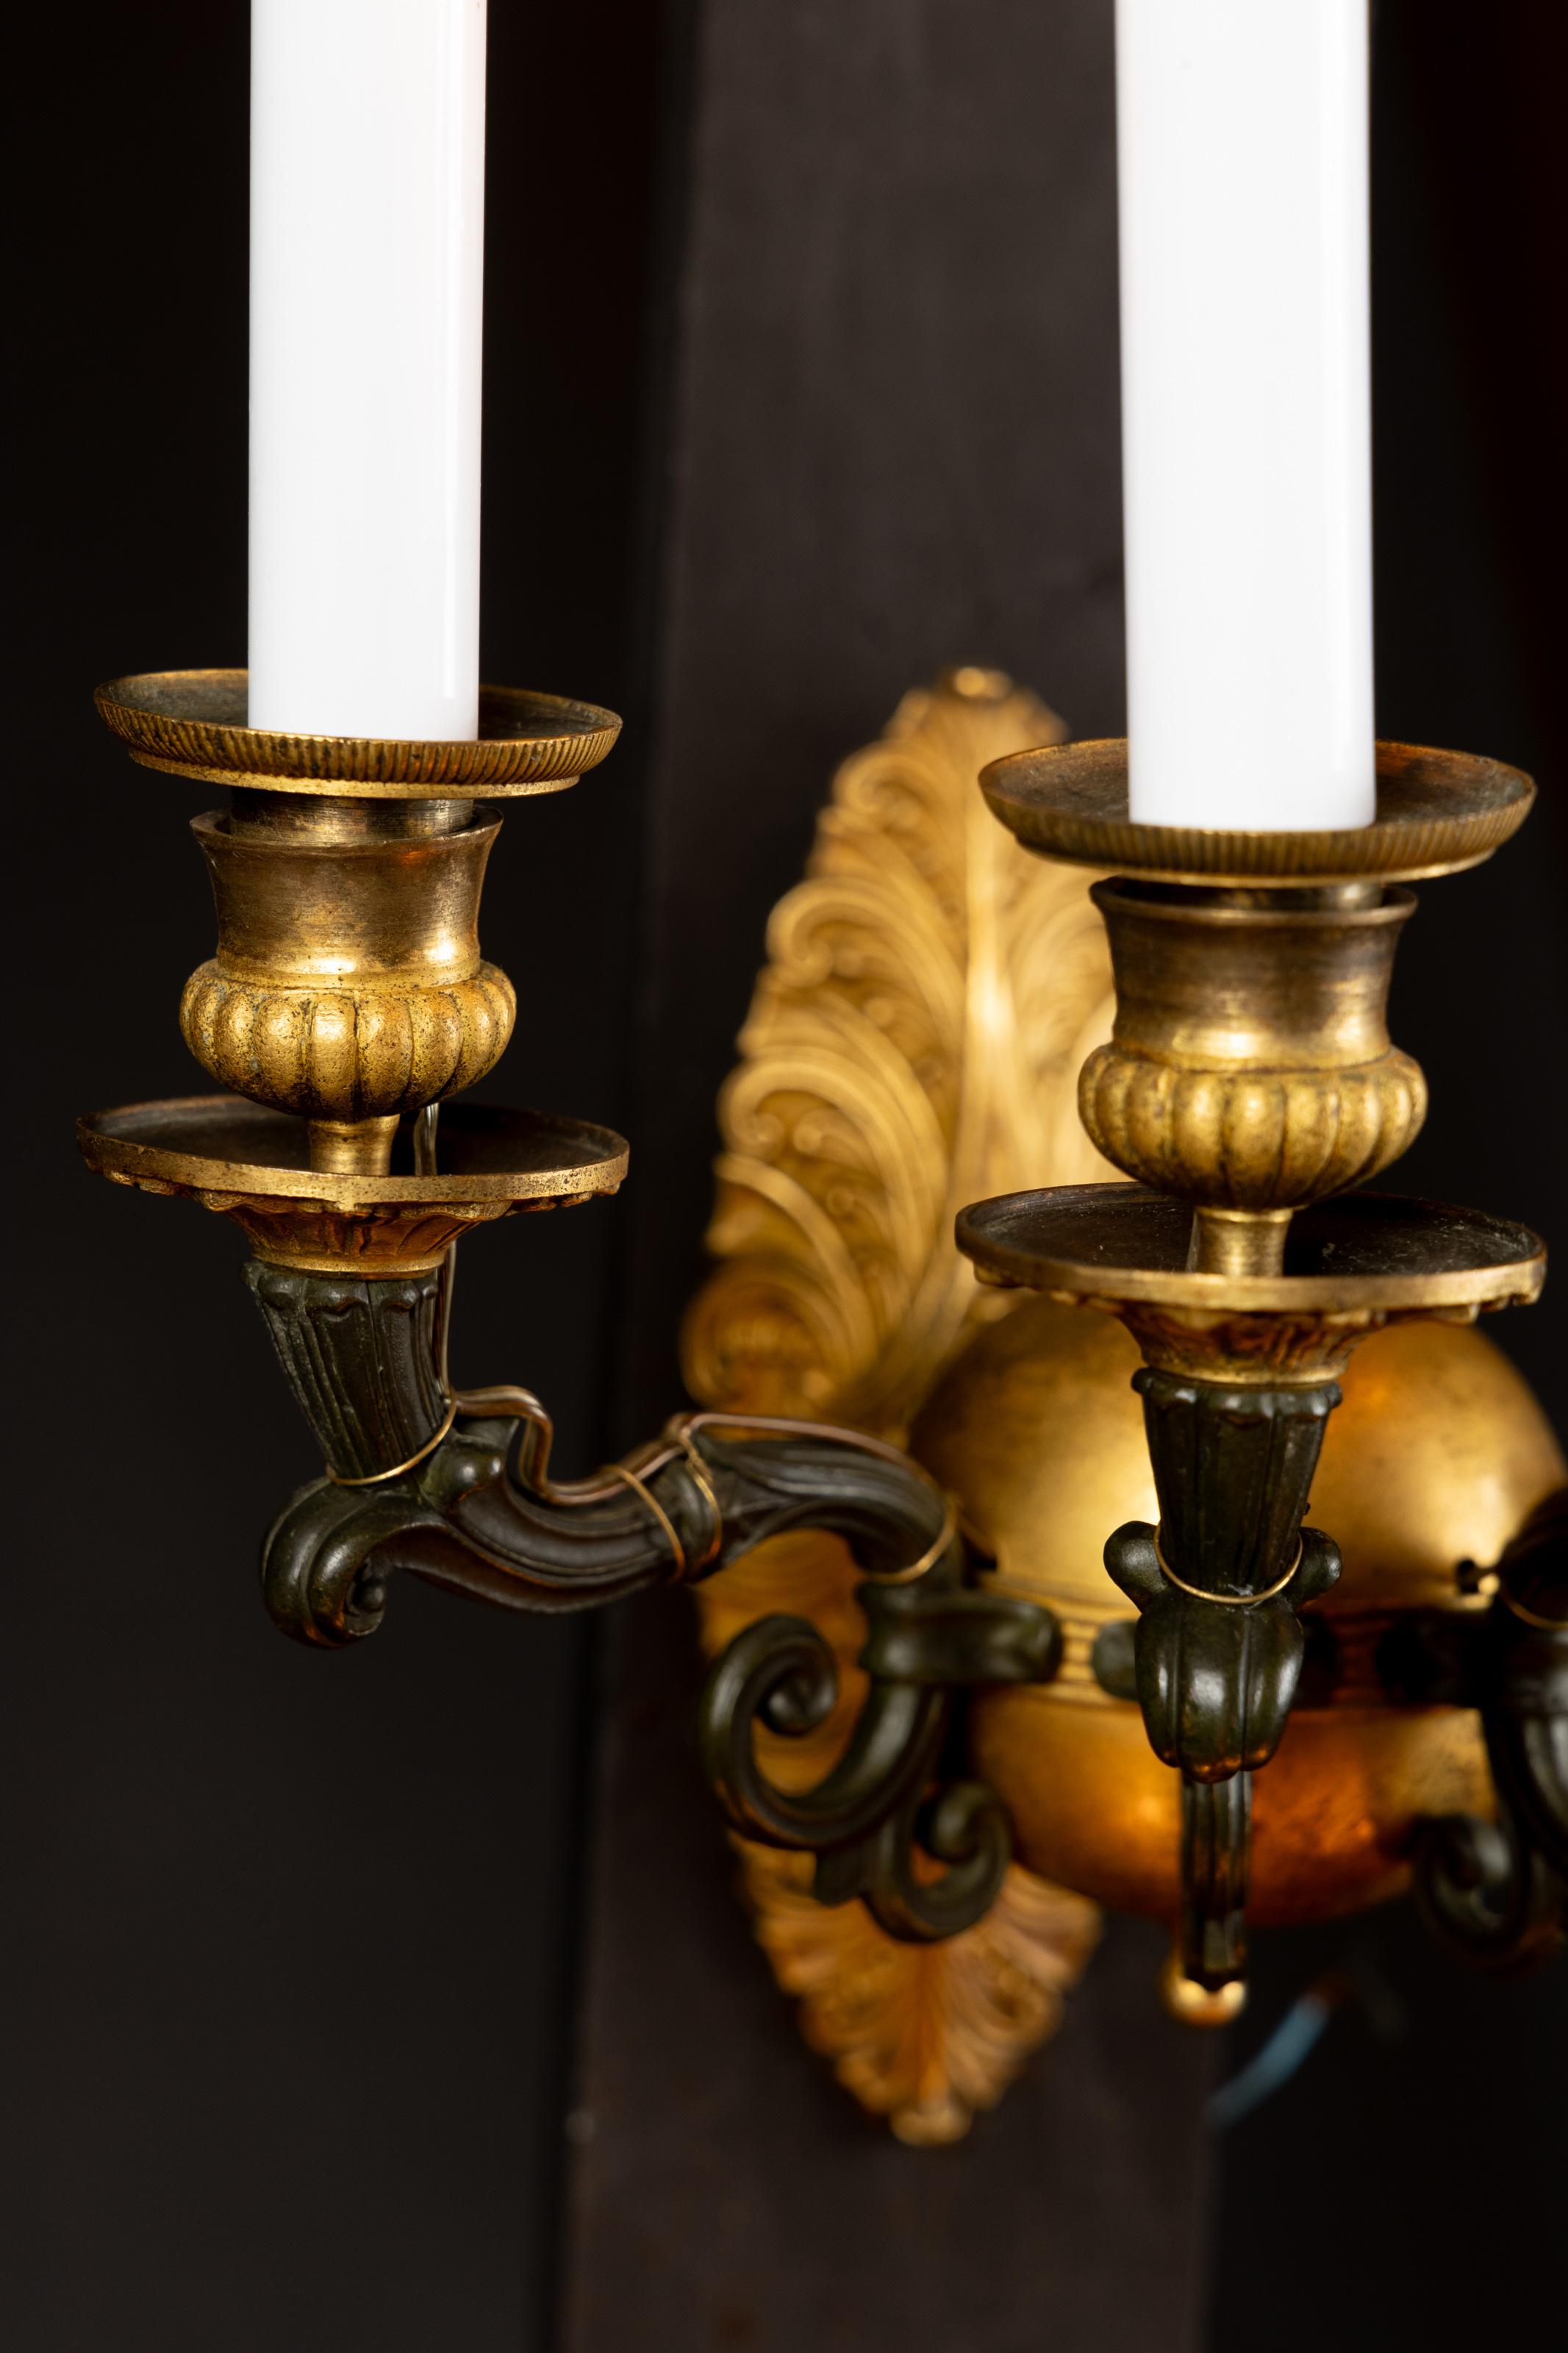 Exquisite French Mid-19th Century Empire Bronze and Patinated Bronze Sconces In Good Condition For Sale In New Orleans, LA